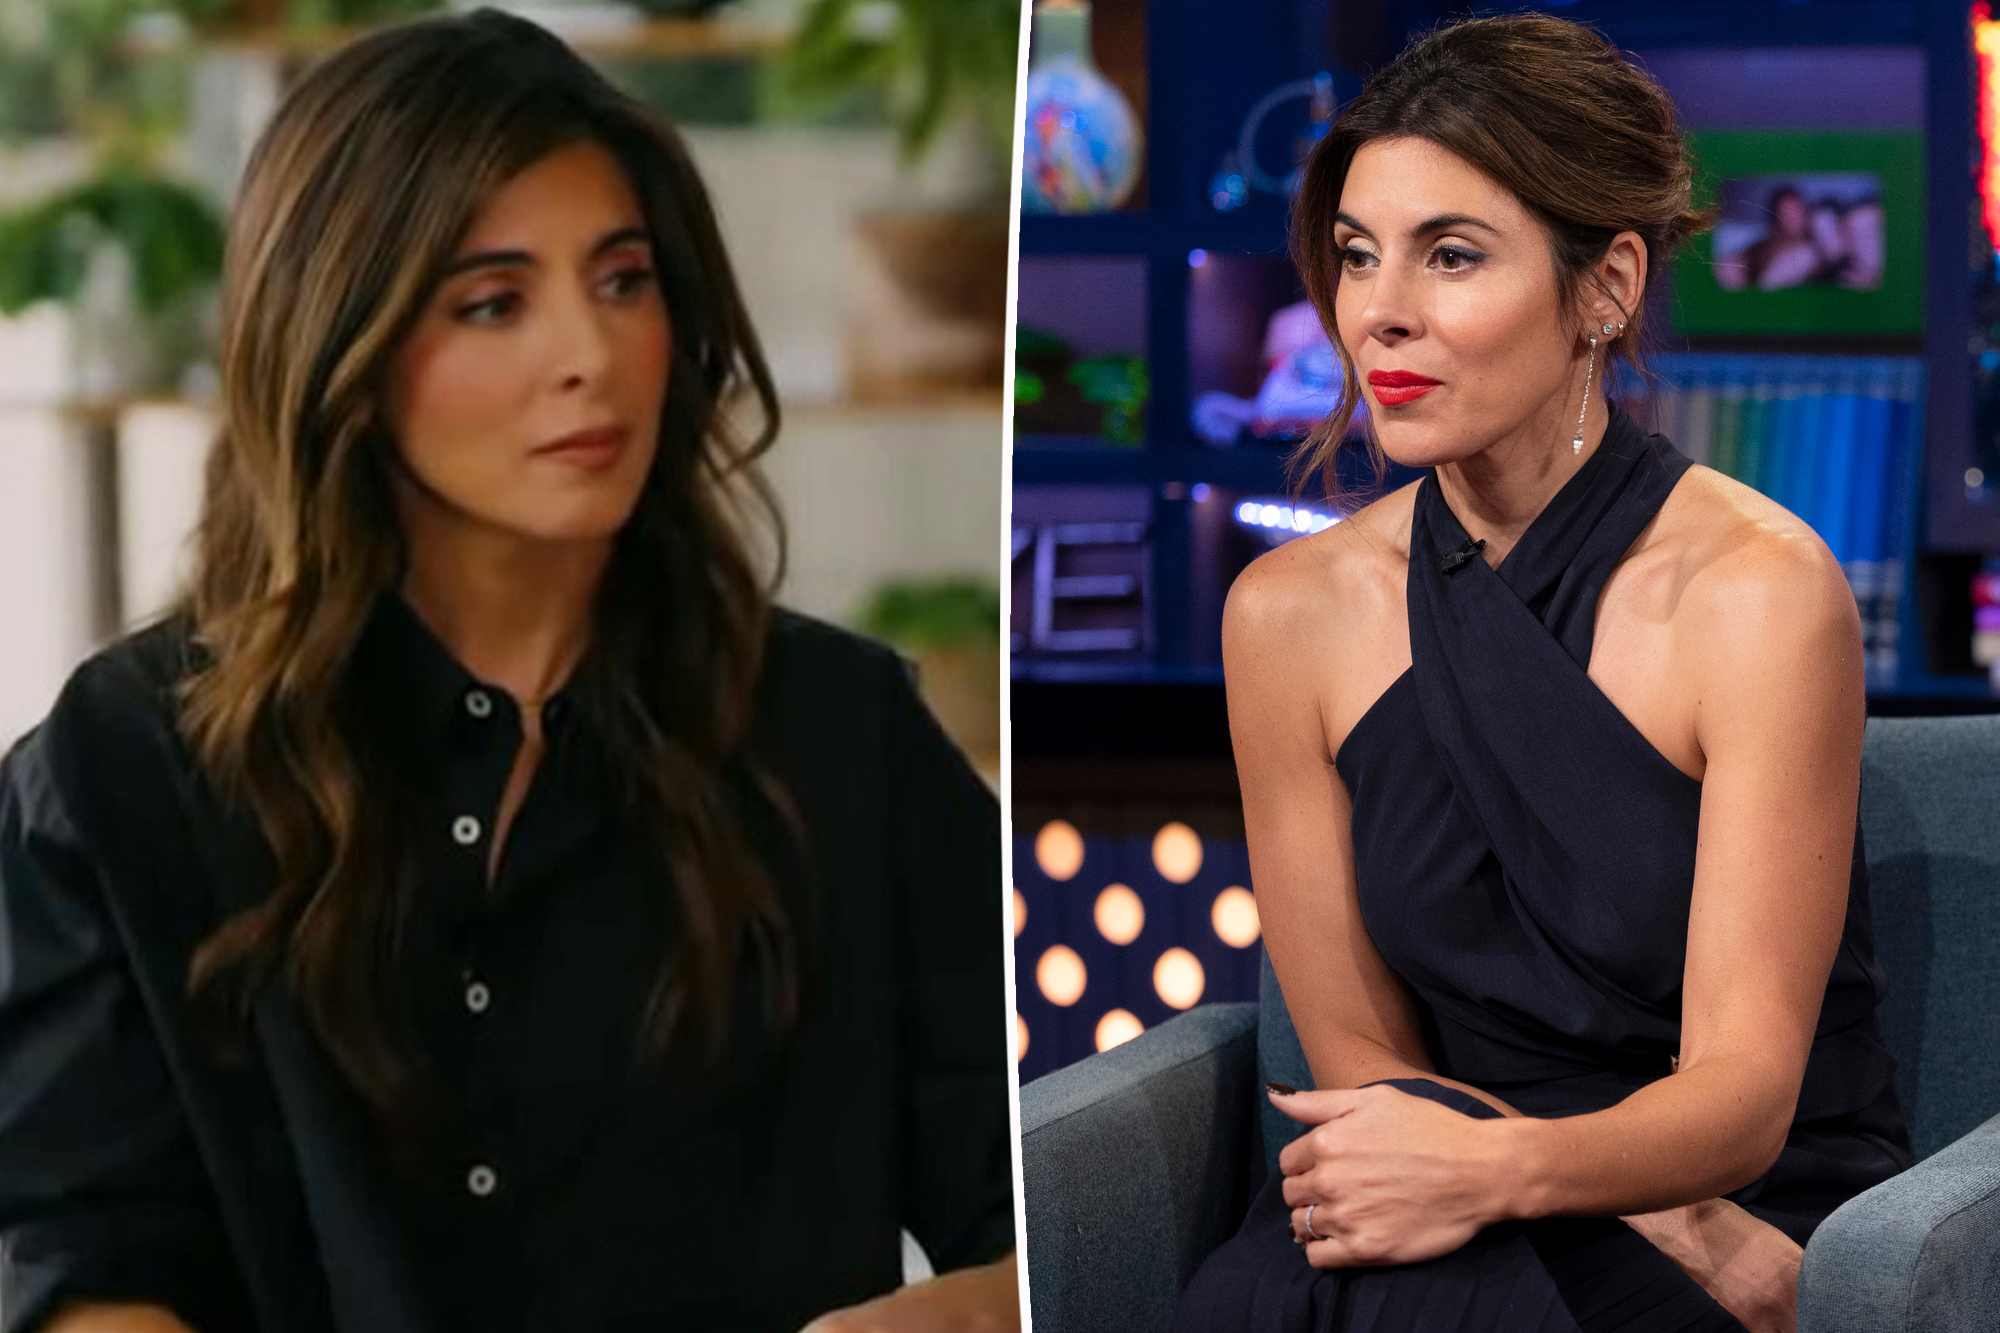 Jamie-Lynn Sigler addresses the misuse of weight loss drug Ozempic